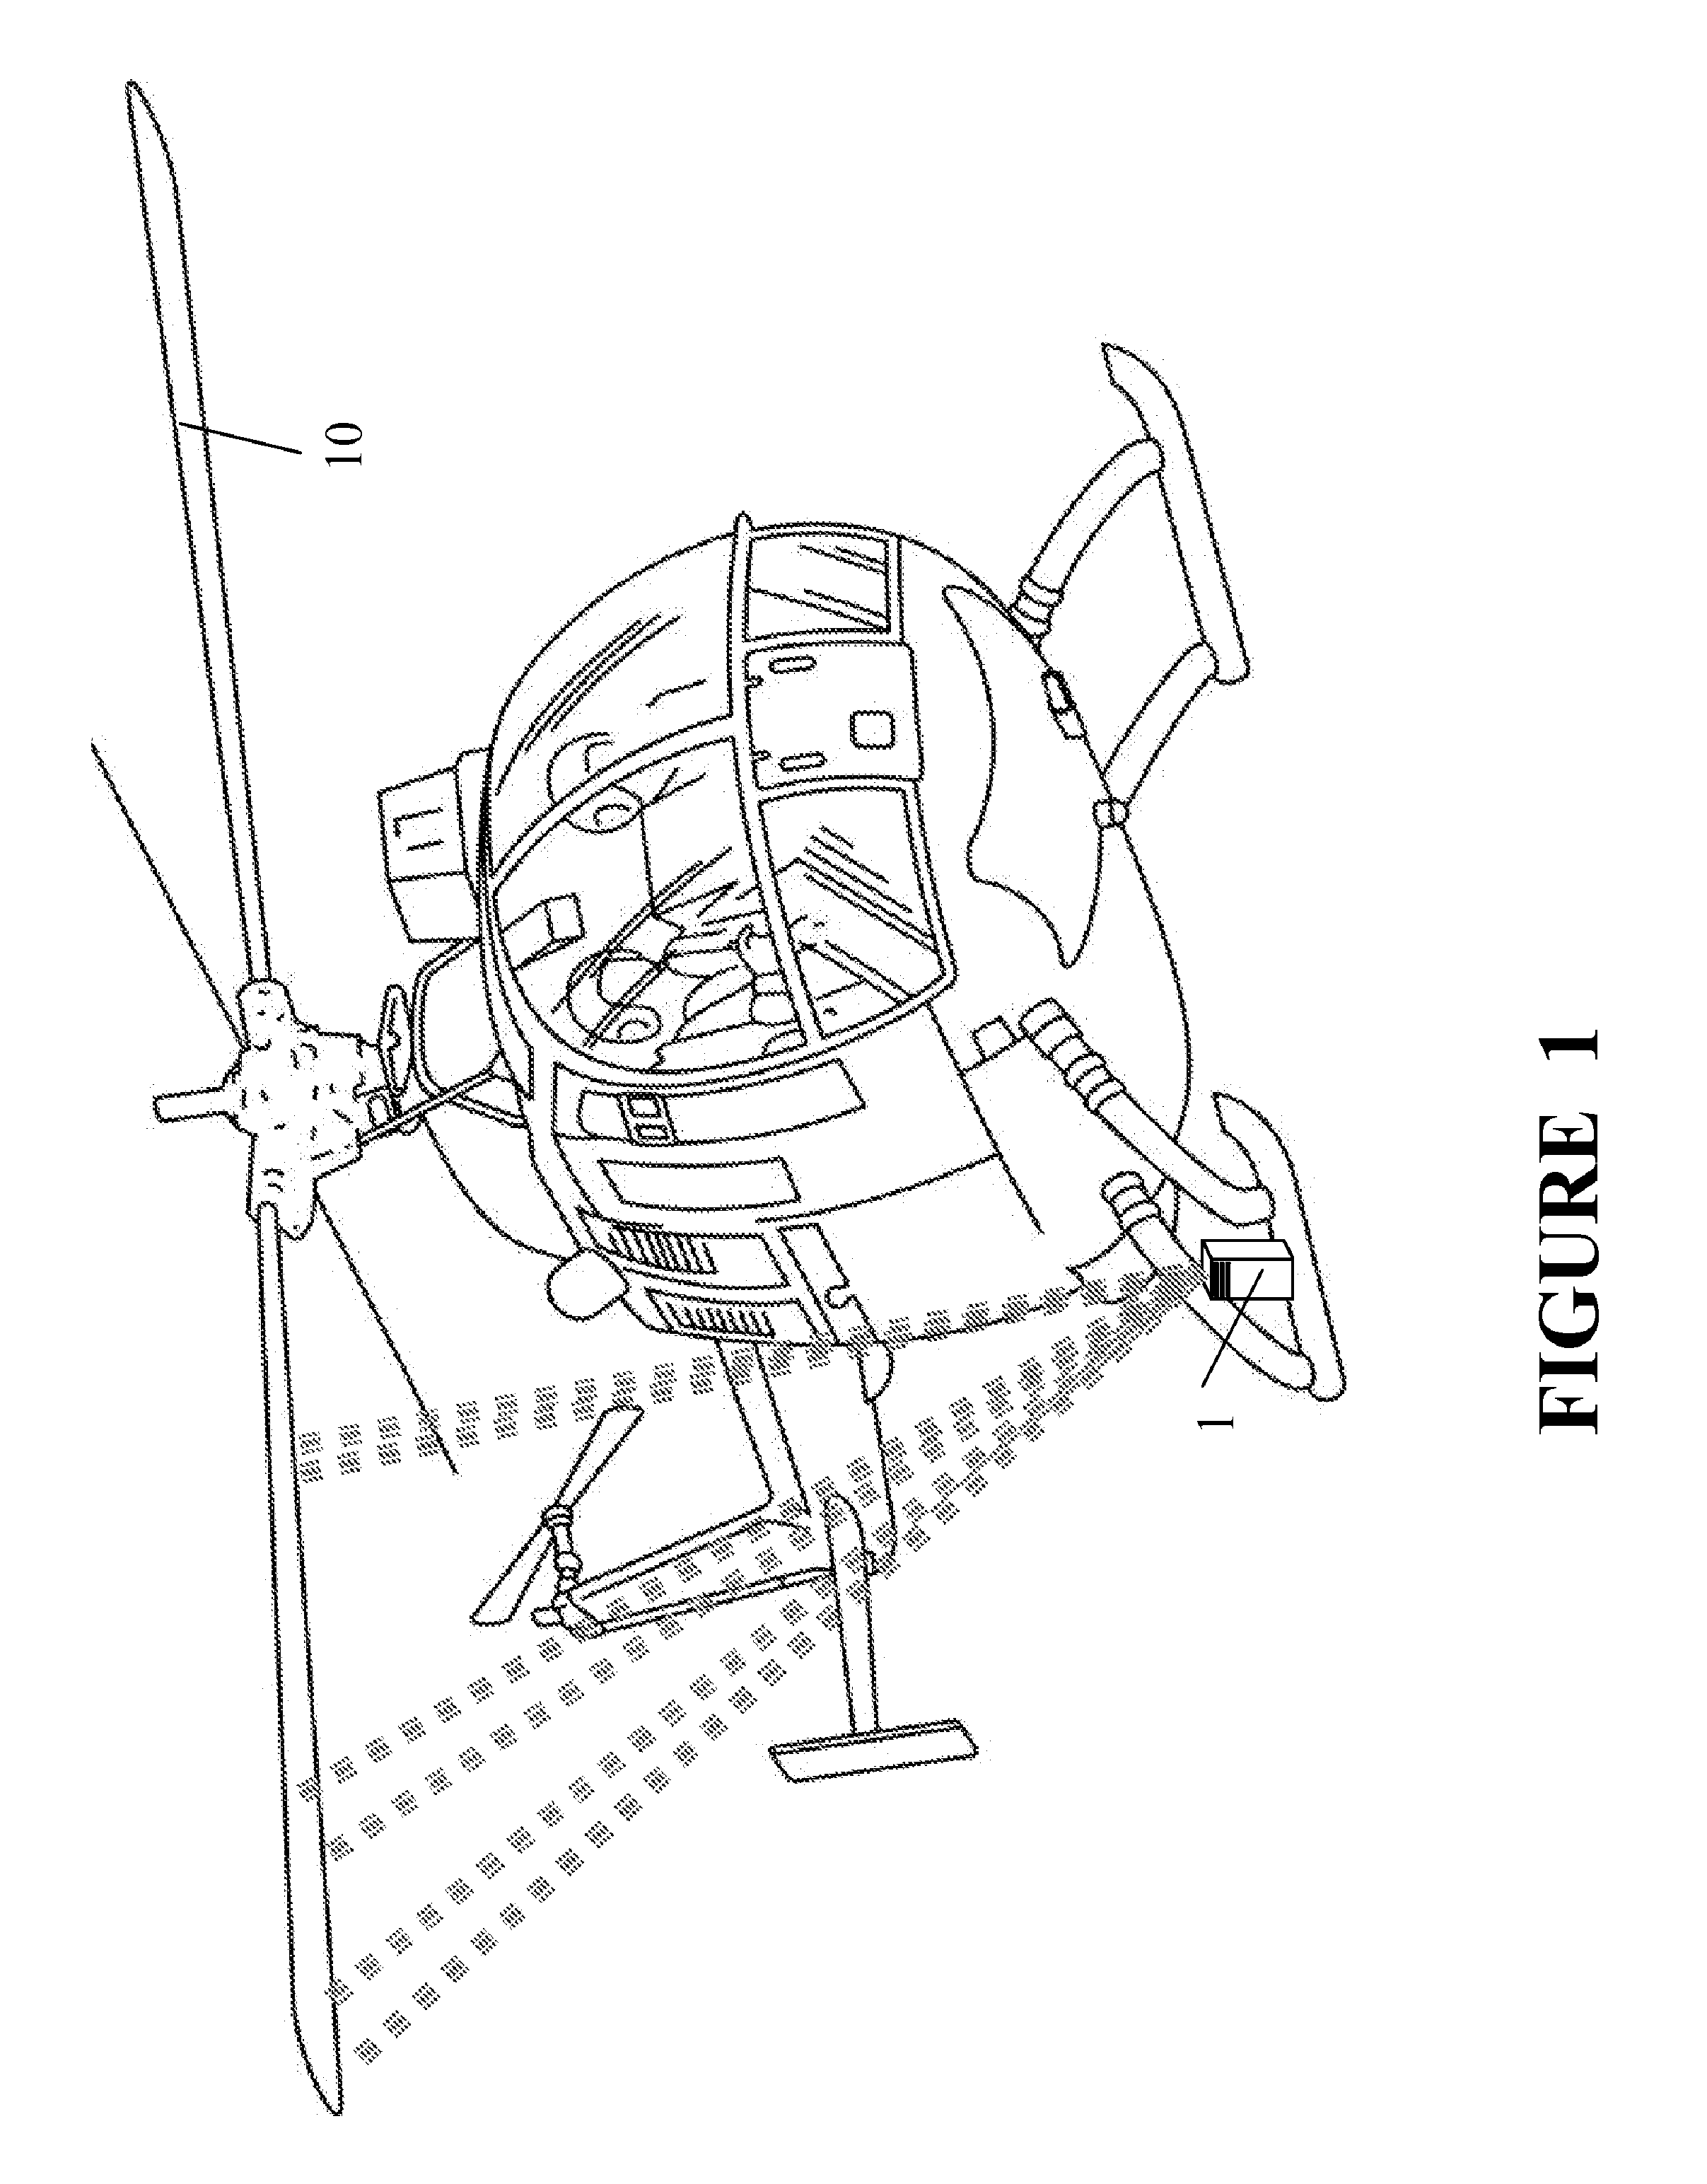 Method for displaying images and/or other information on aircraft blades